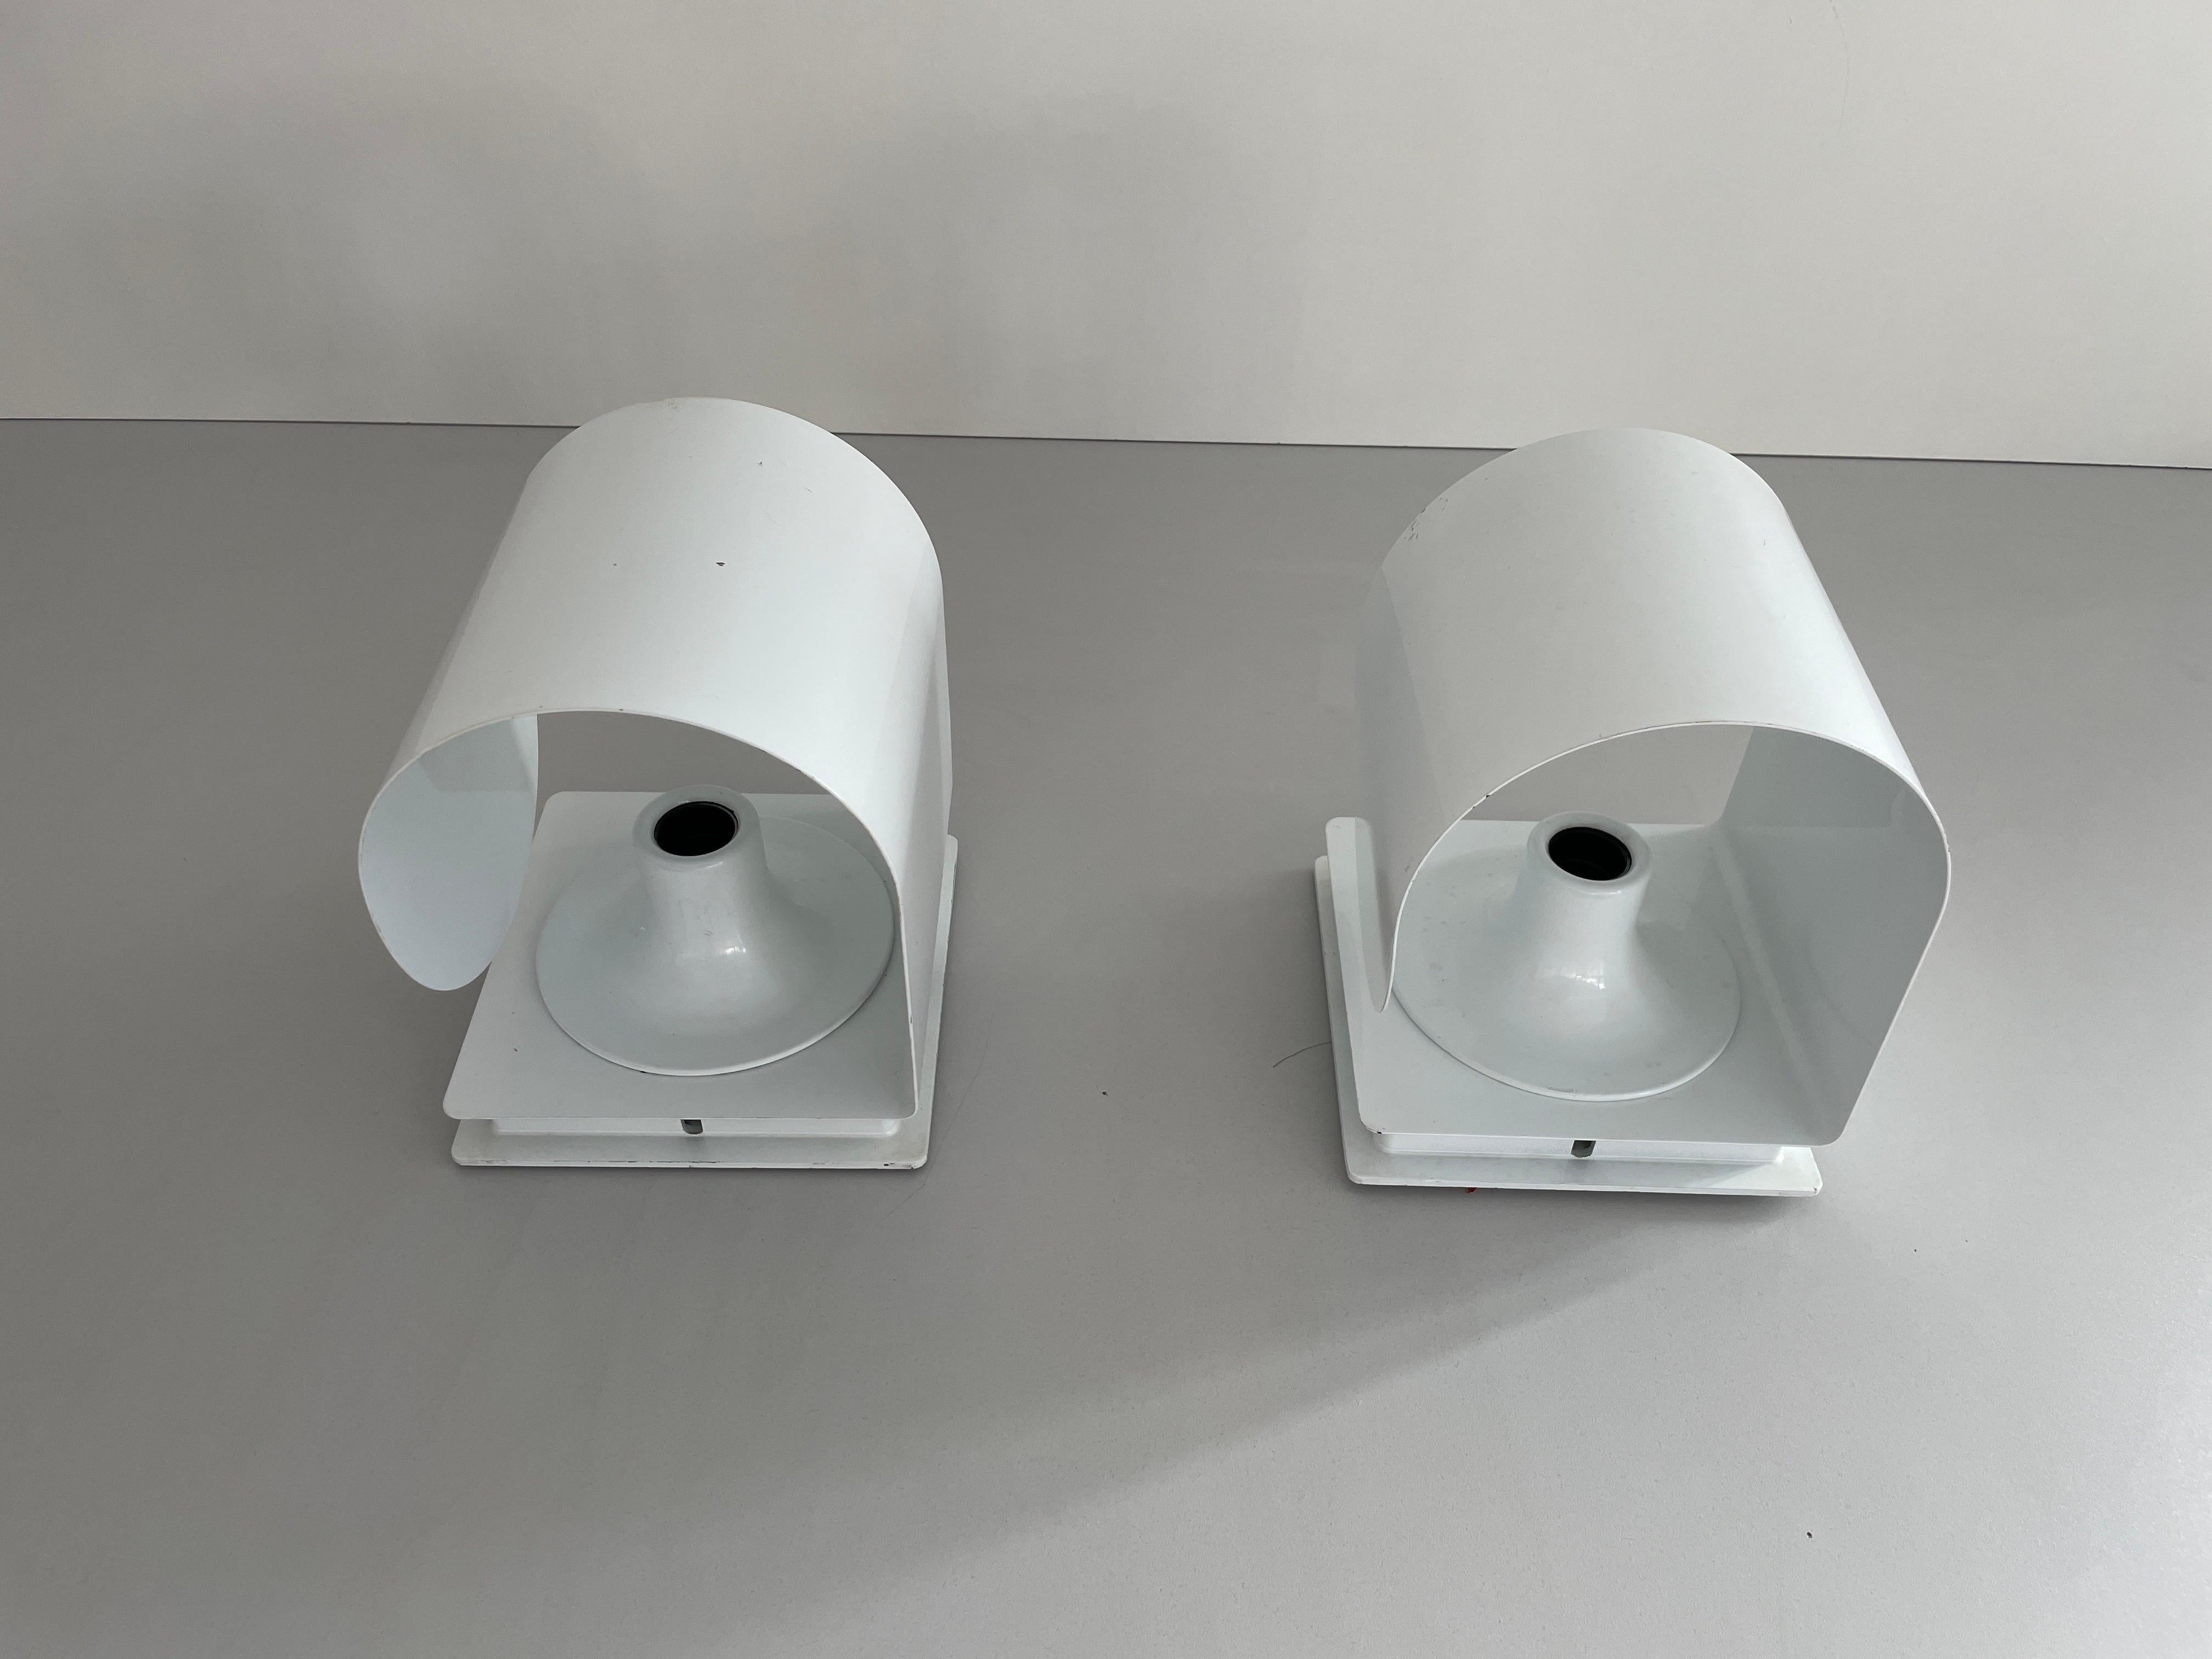 Curve Shaped White Metal Space Age Pair of Sconces, 1970s, Italy

Very elegant and minimal design wall lamps
Lamp is in very good condition.

These lamps works with E27 standard light bulbs. 
Wired and suitable to use in all countries. (110-220